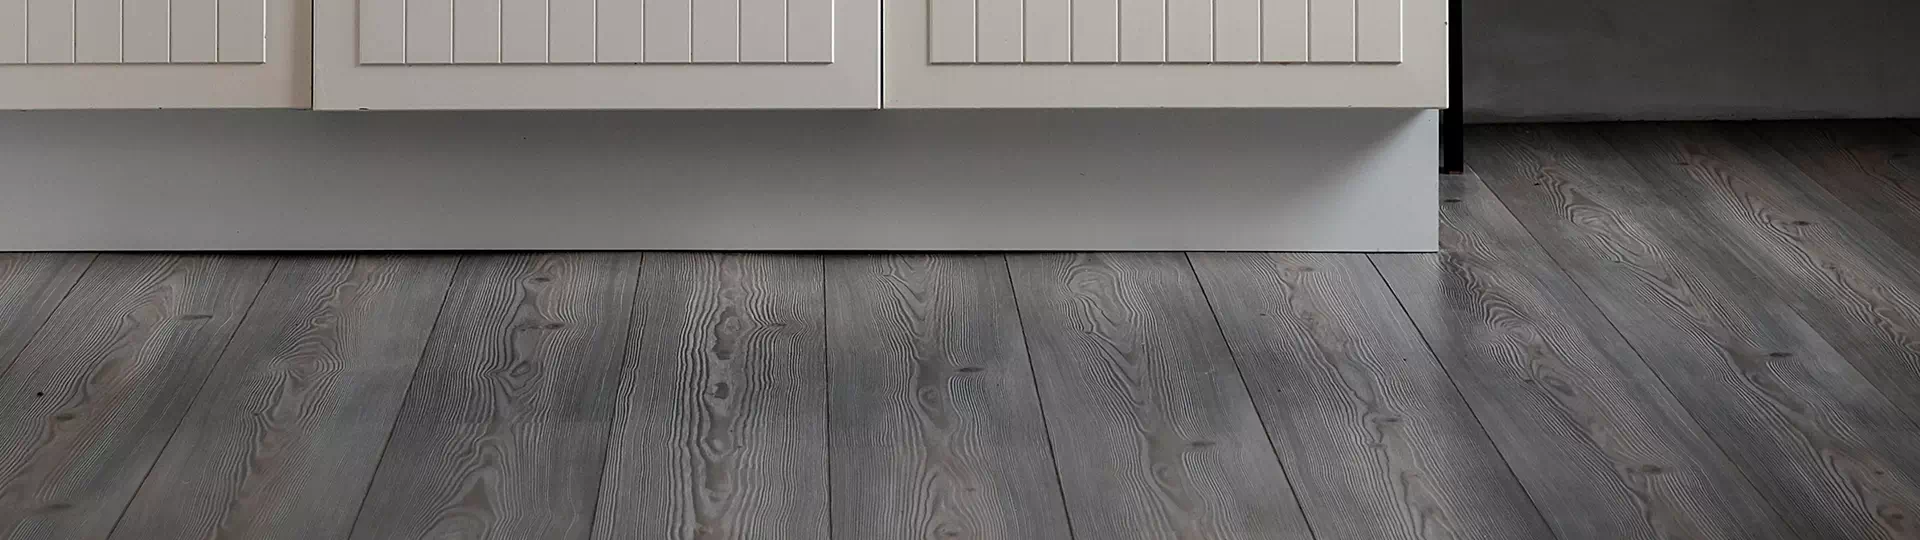 How To Clean Engineered Hardwood Floors, How To Get Black Out Of Hardwood Floors